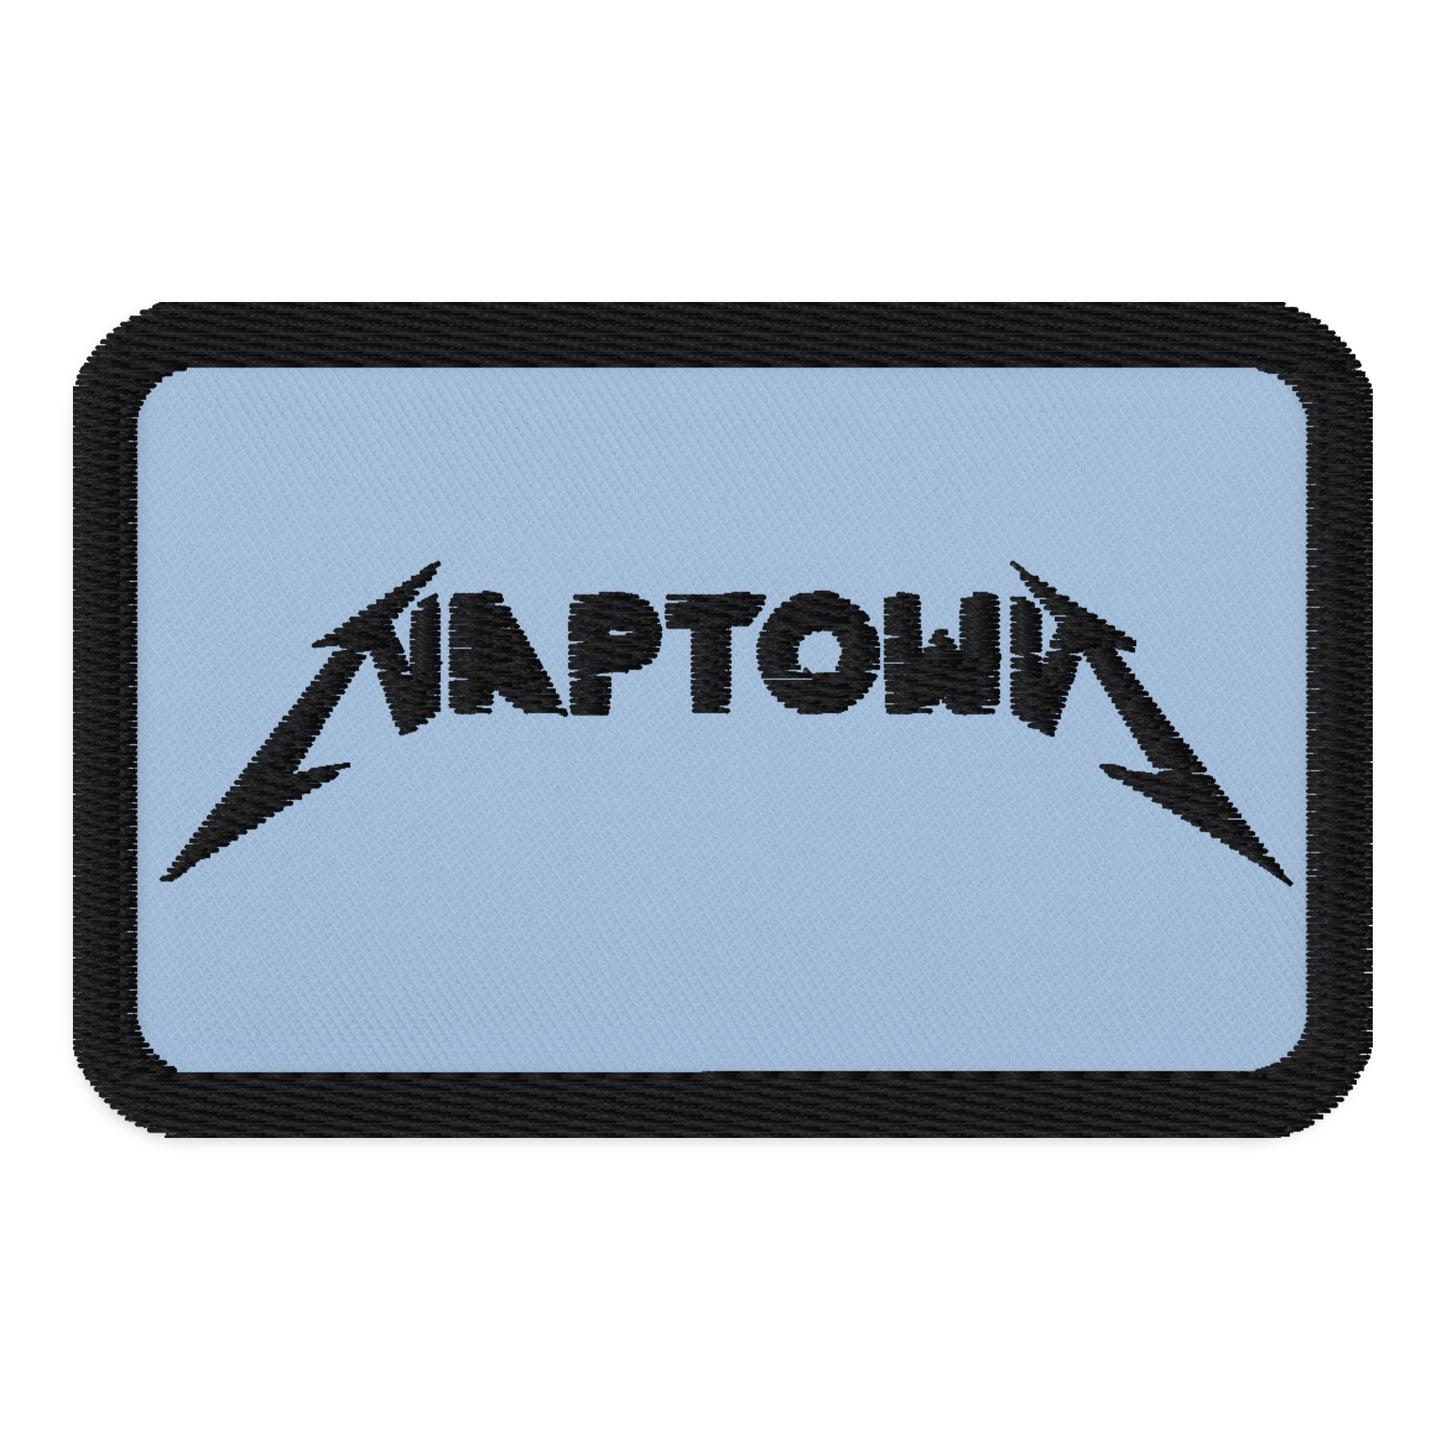 NAPTOWN Embroidered Patch 3.5"x2.25" - Black Font